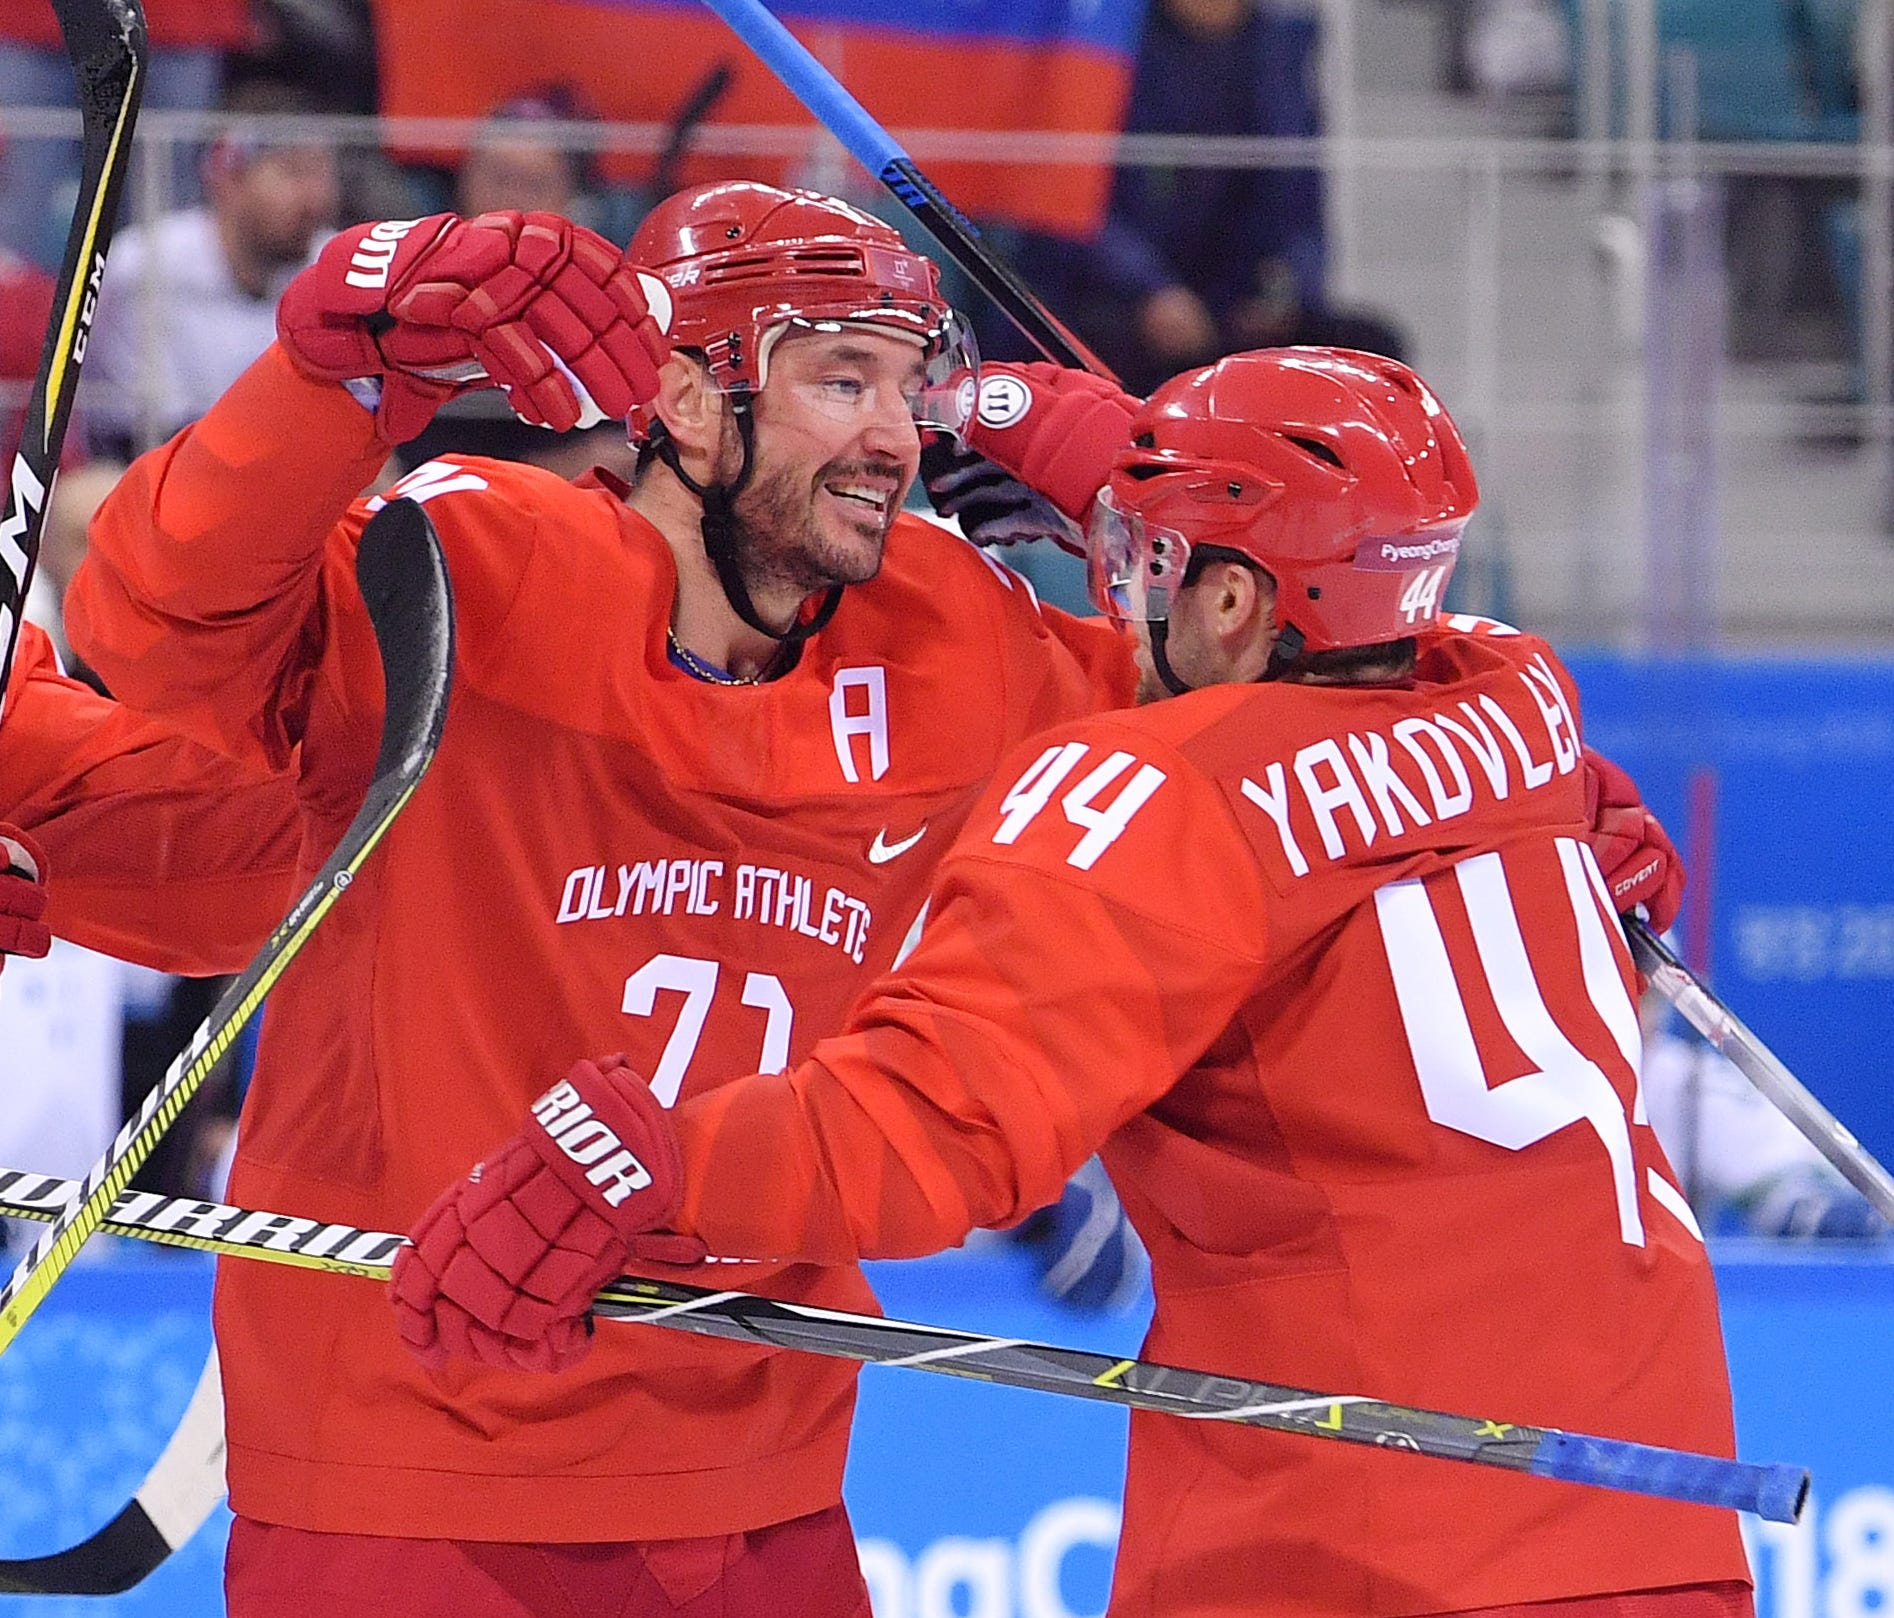 Olympic Athlete of Russia forward Ilya Kovalchuk (71) celebrates his goal during the first period against Slovenia at the Pyeongchang 2018 Olympic Winter Games at Gangneung Hockey Centre.